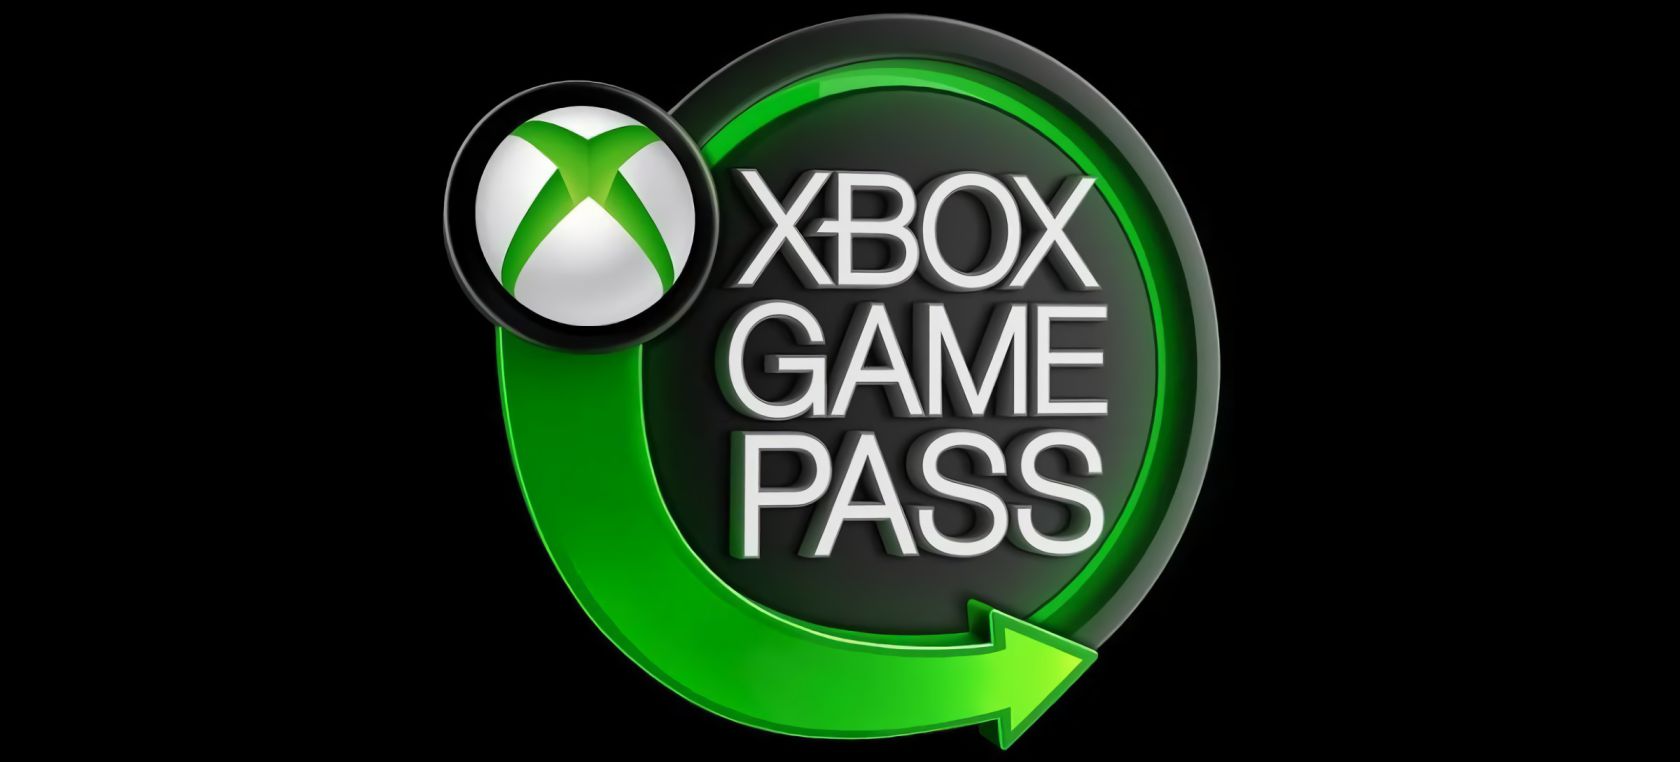 can xbox game pass be used with pc